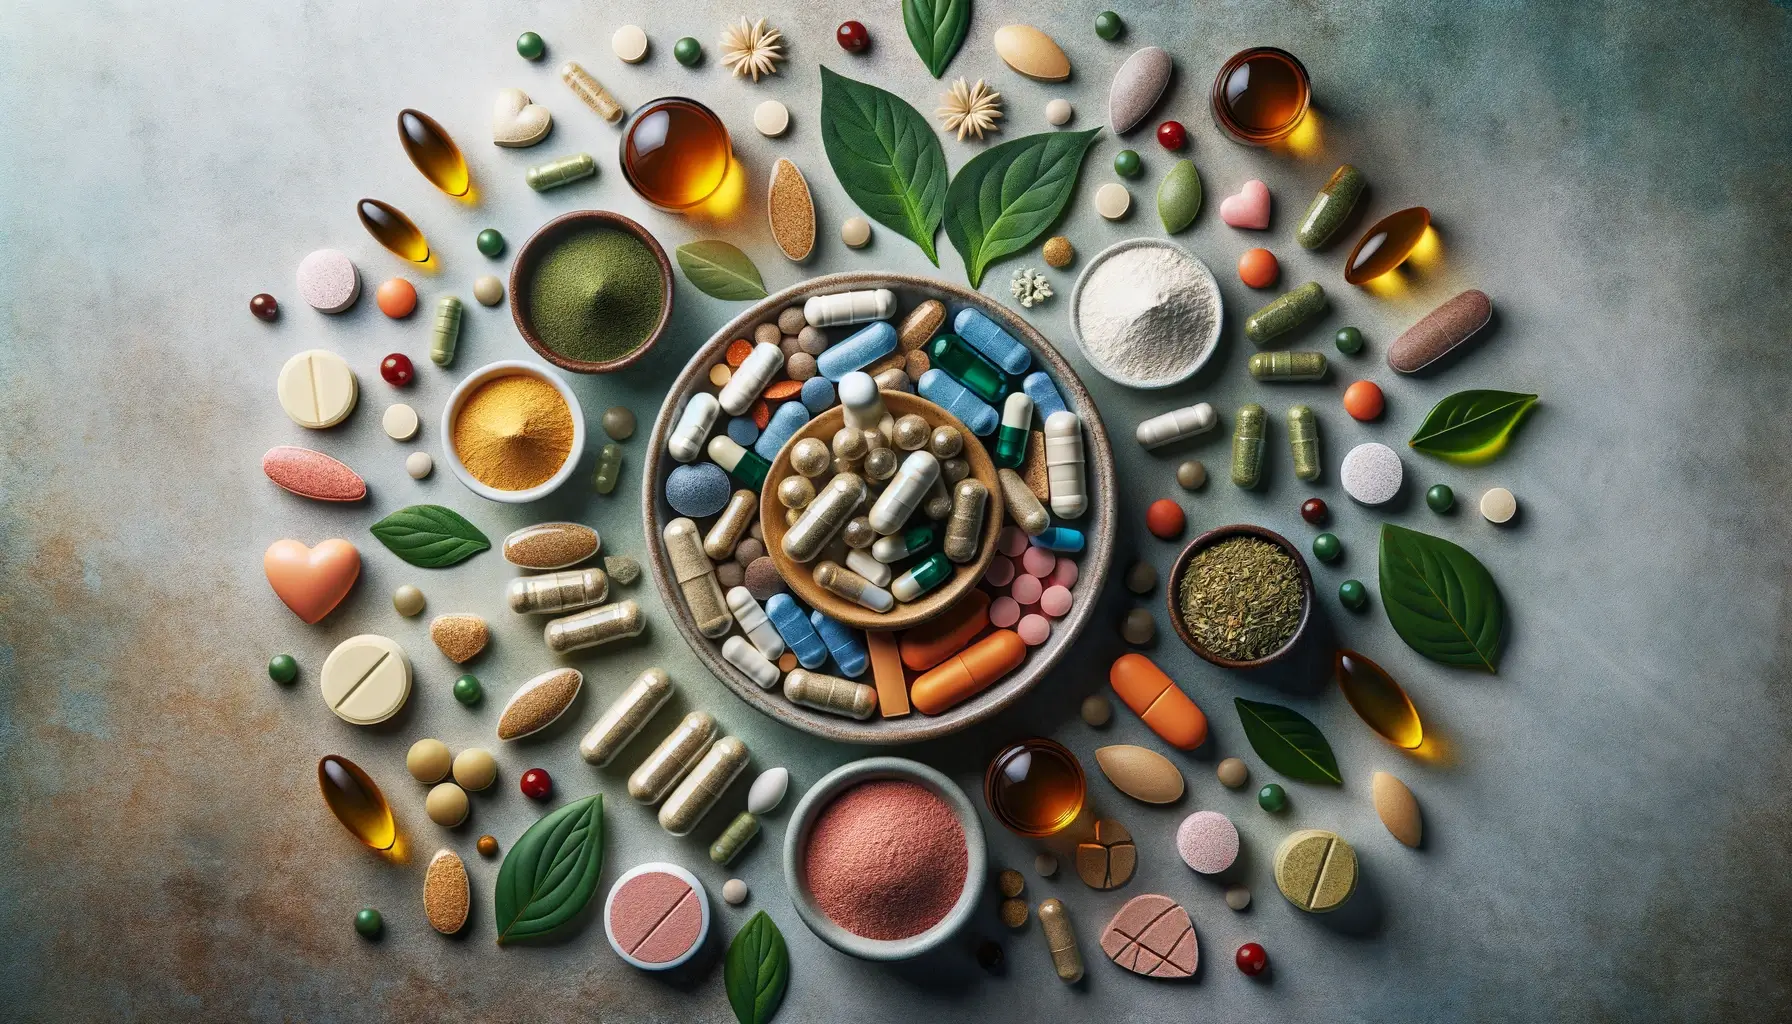 A diverse array of dietary supplements in various forms and colors, including tablets, capsules, powders, and herbs, artistically arranged around a bowl on a textured surface, signifying the wide range of options in nutritional supplementation.